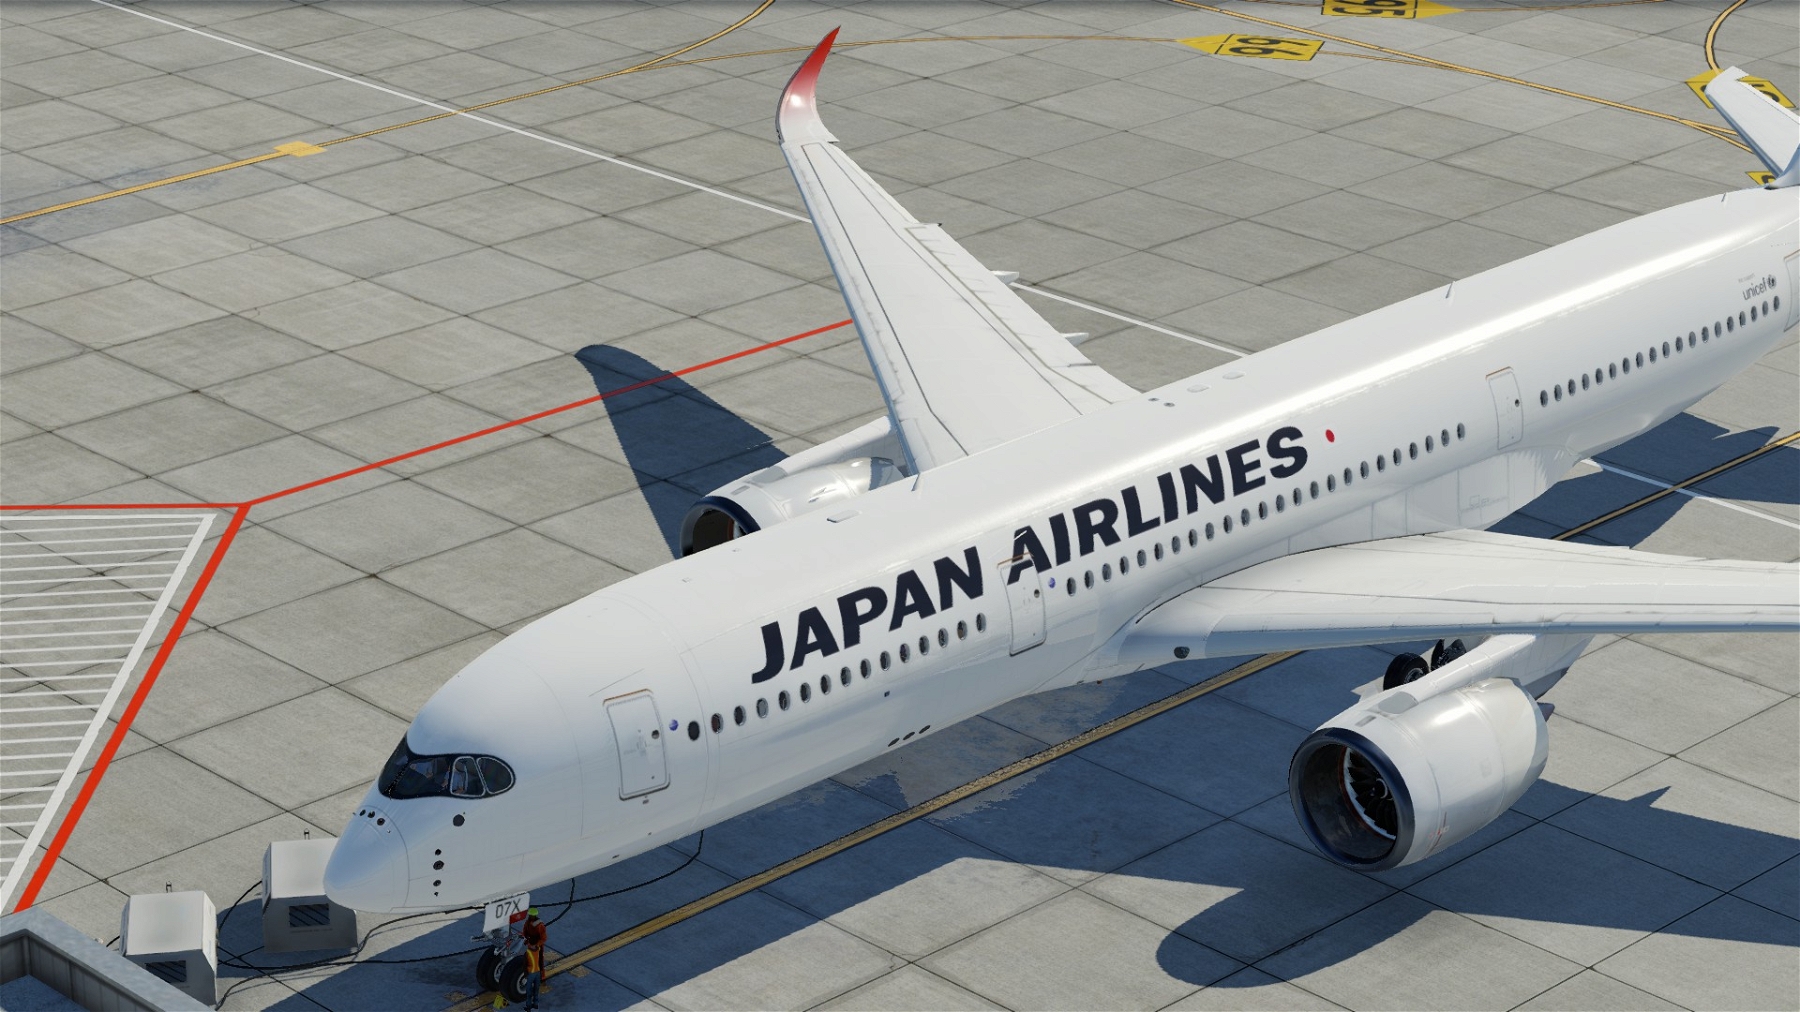 ⚡(JAL) JAPAN AIRLINES 8K LIVERY / JA07XJ / AIRBUS A350-900 » X 